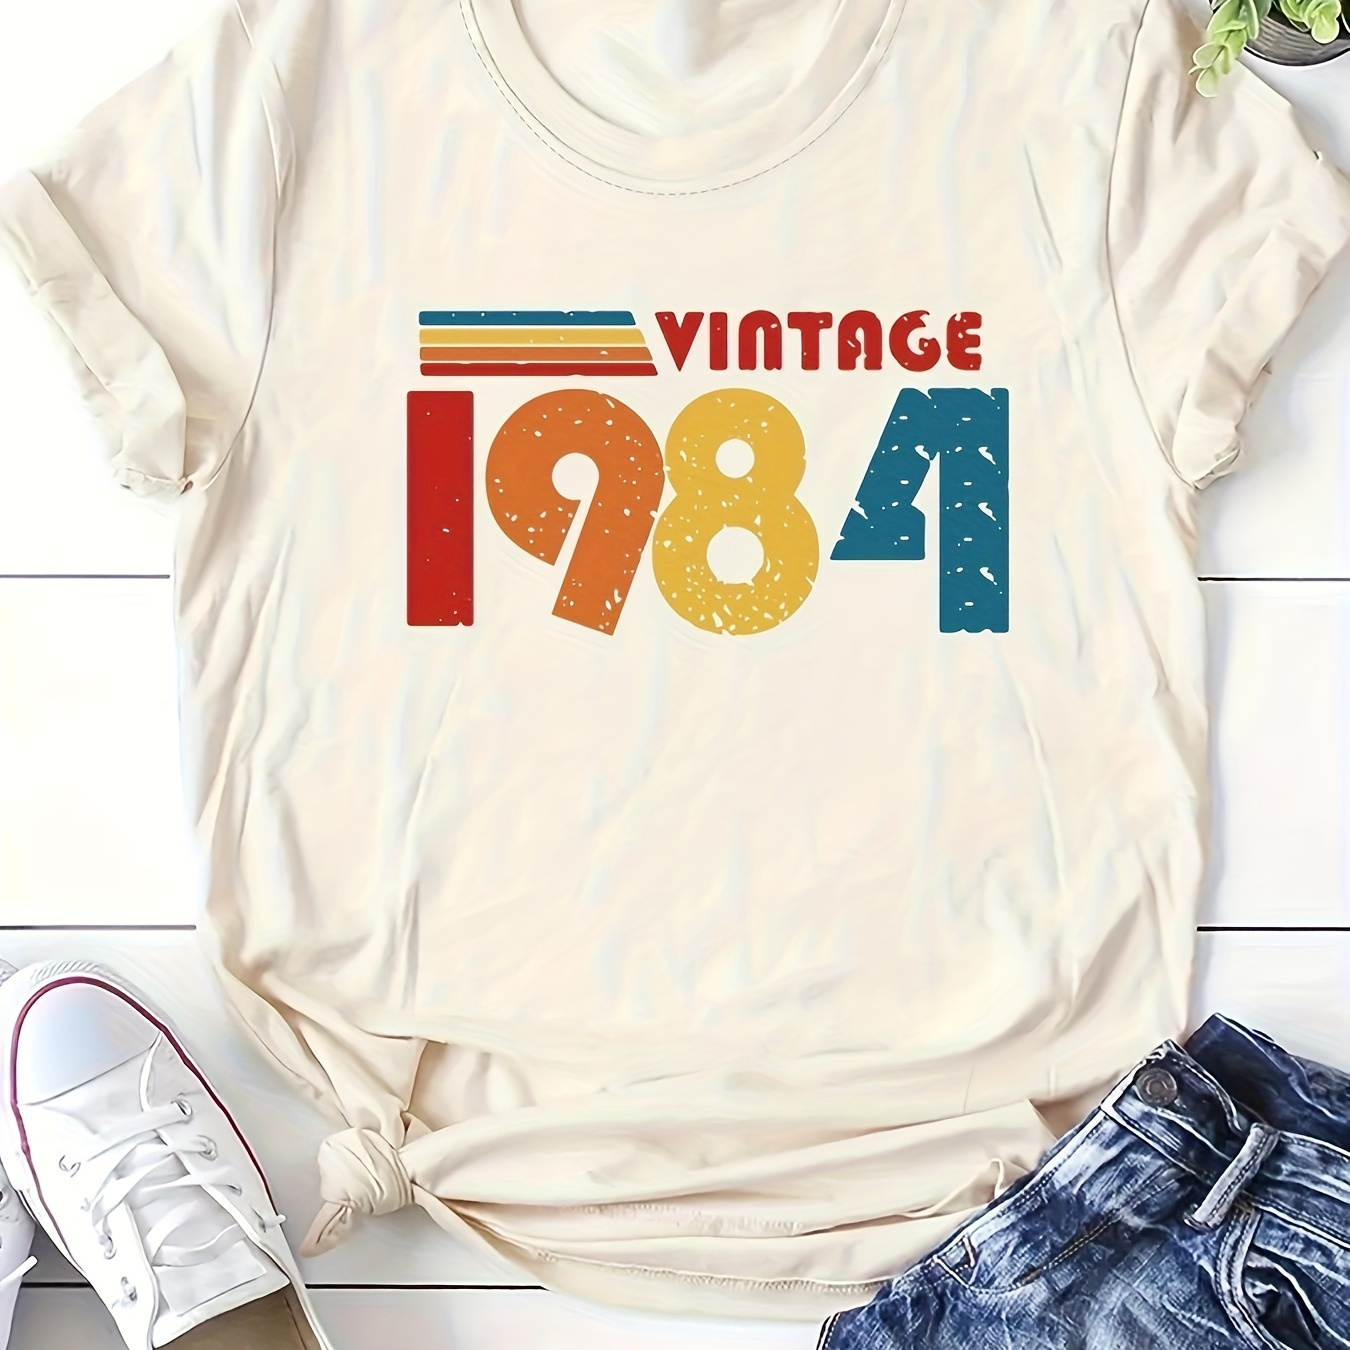 

Vintage 1984 Print Crew Neck T-shirt, Short Sleeve Casual Top For Summer & Spring, Women's Clothing